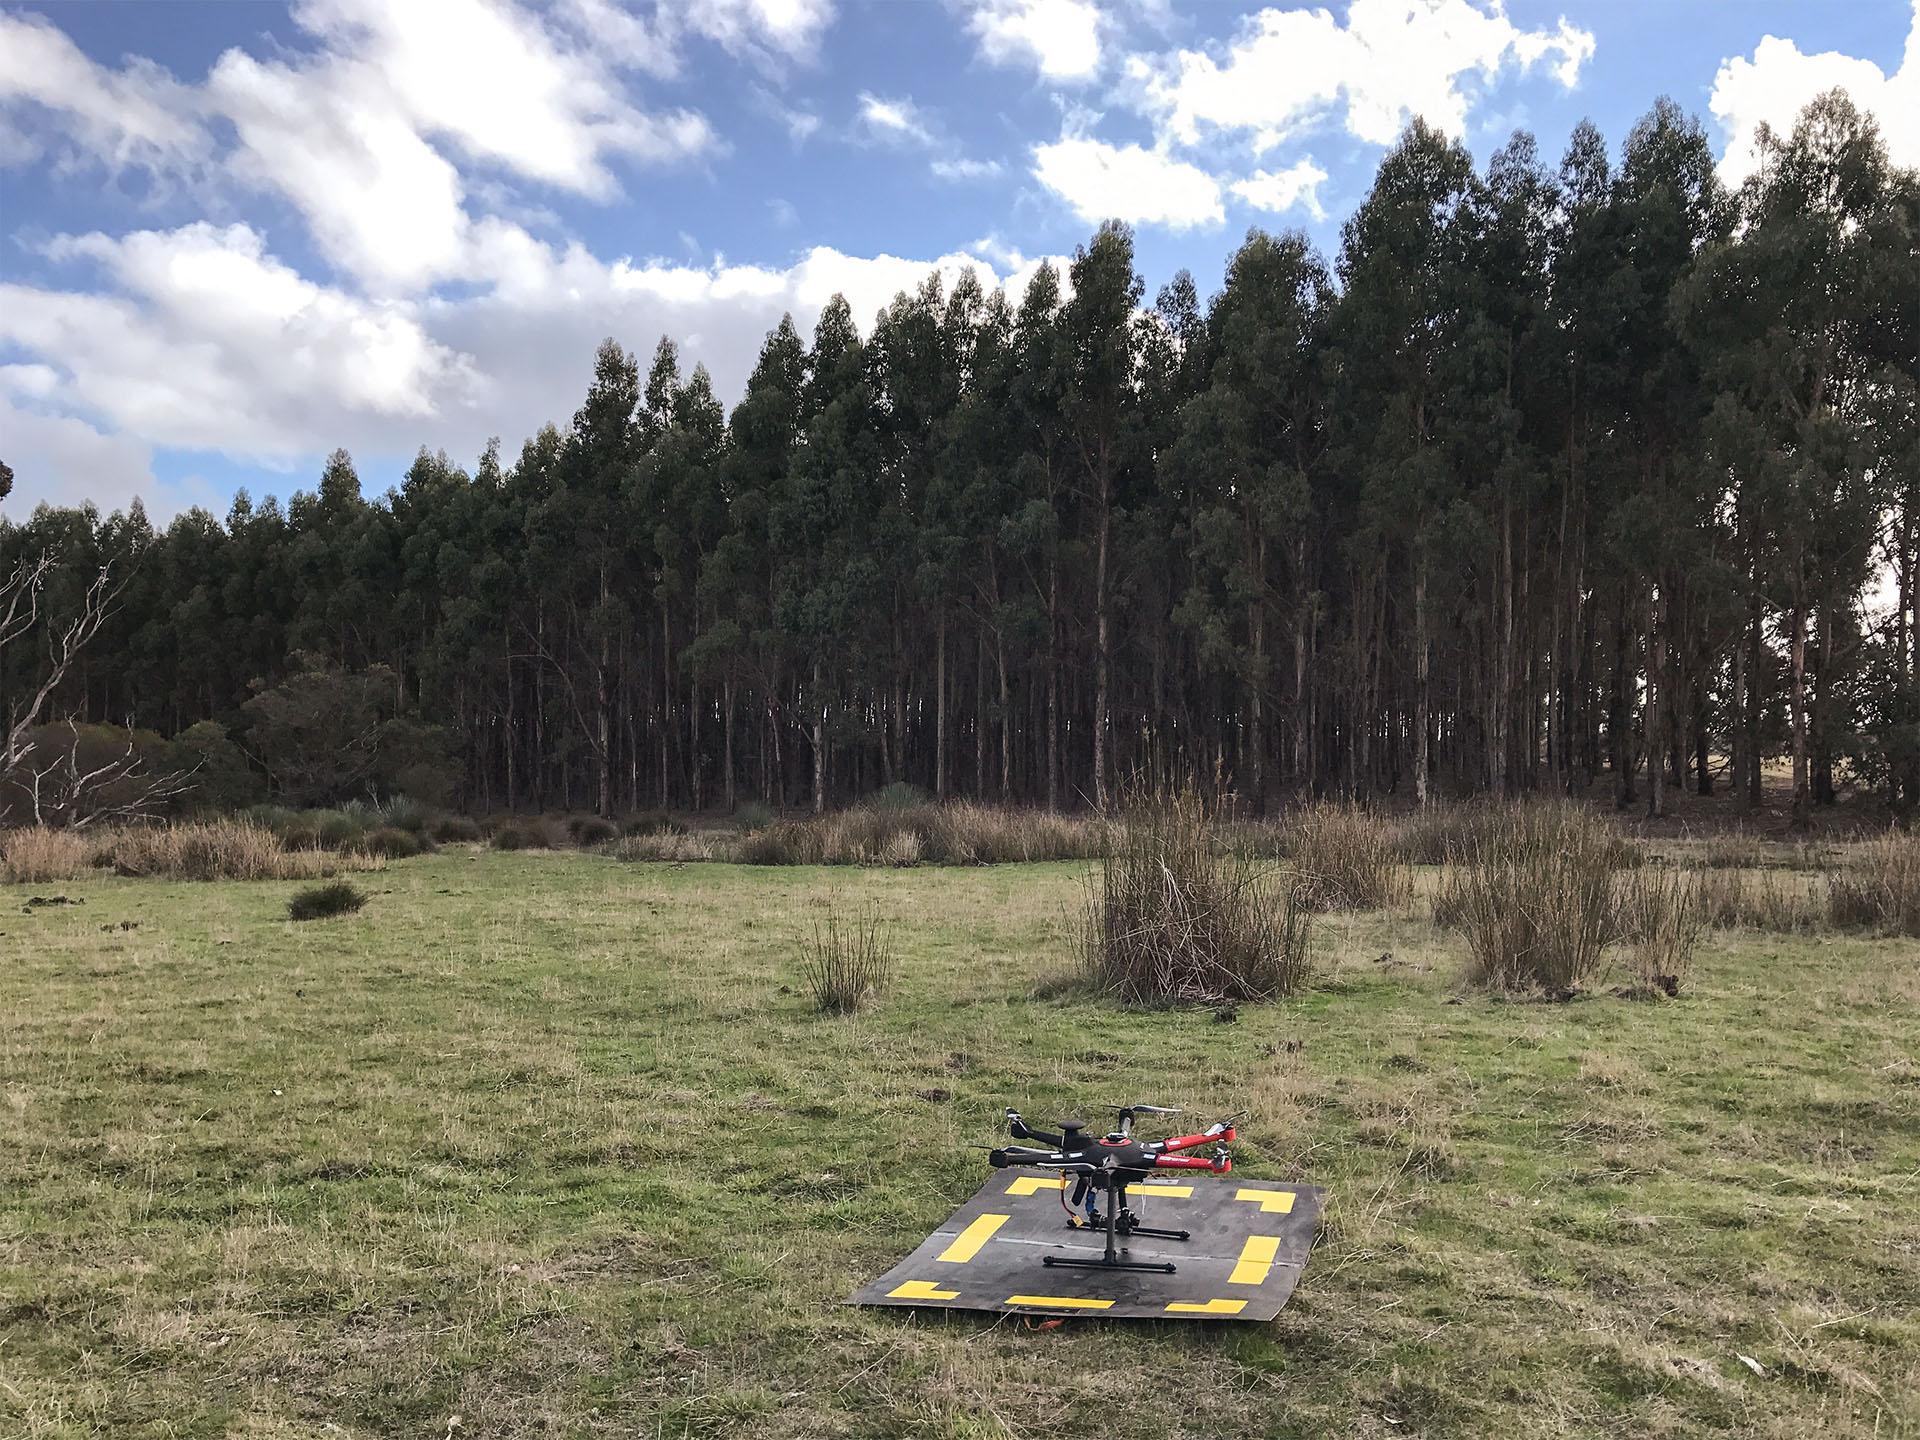 Drone research at University of Adelaide